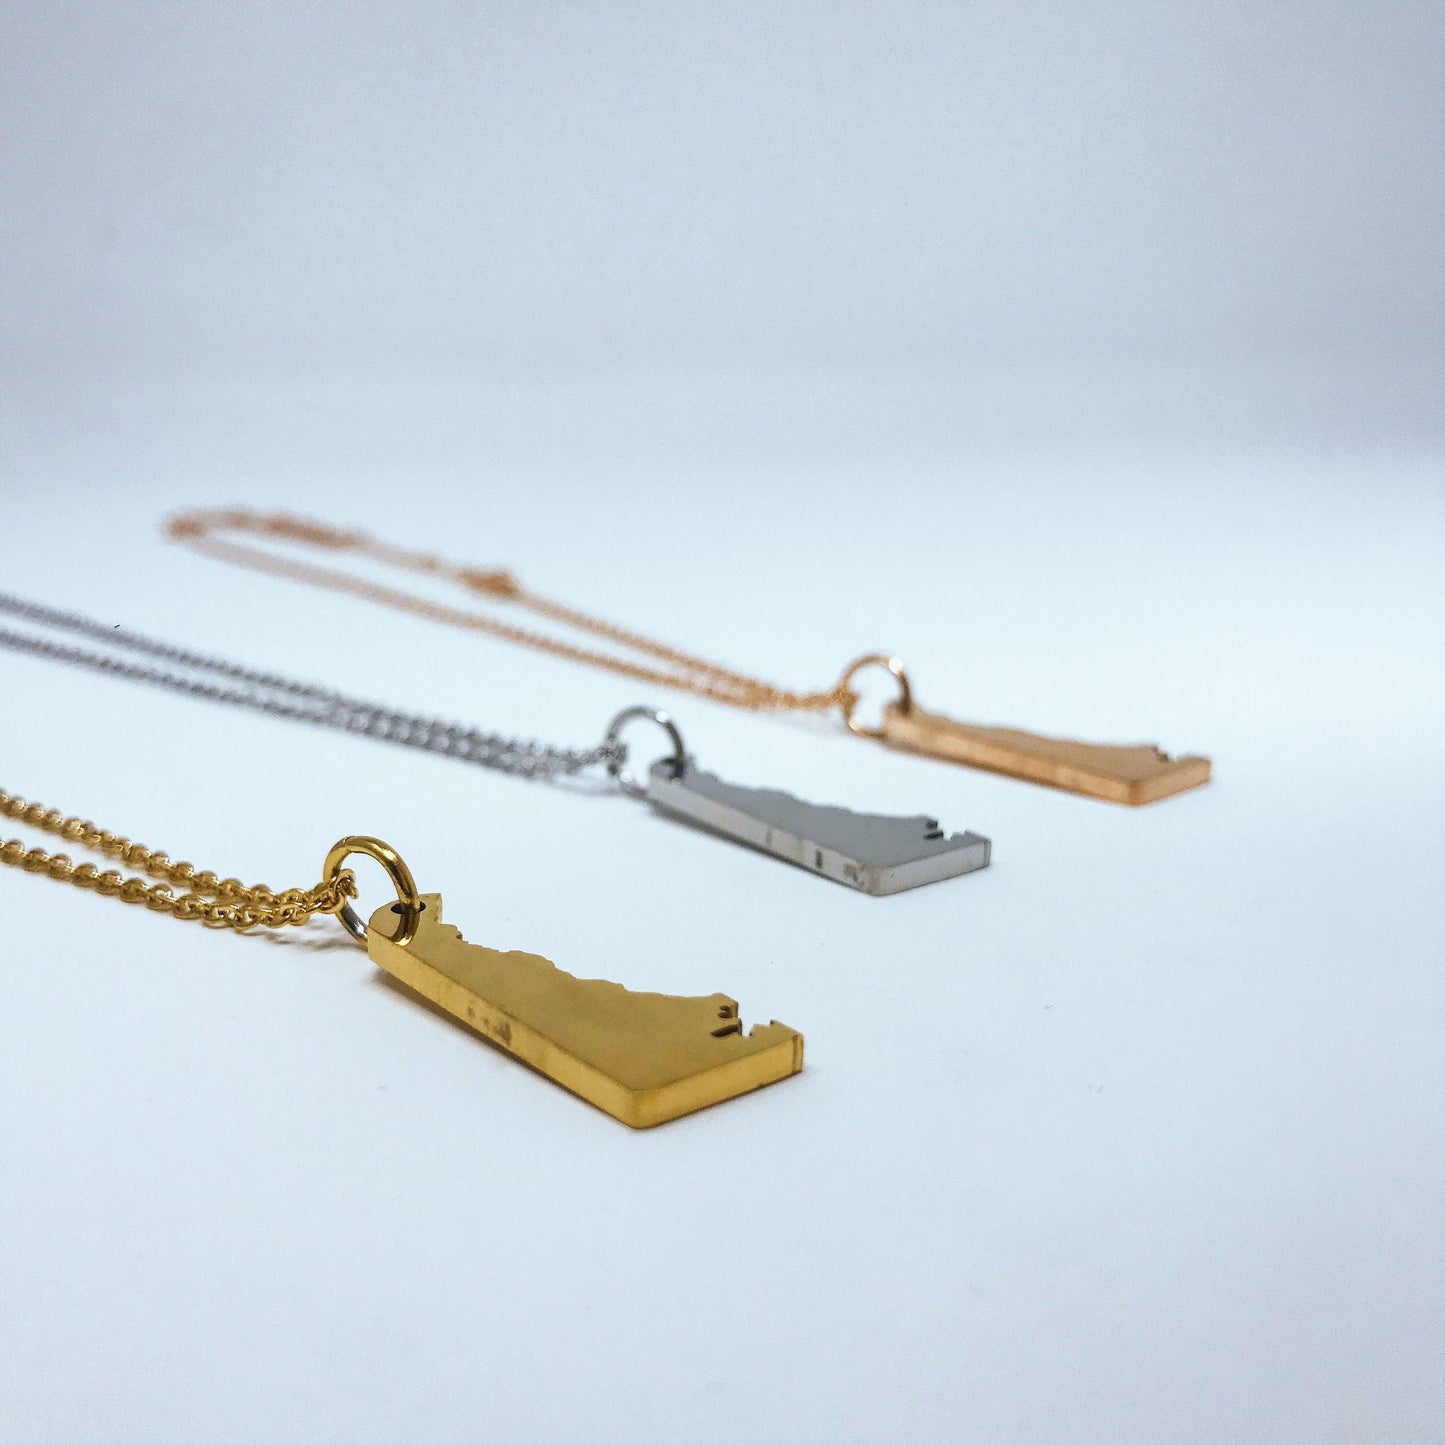 Delaware State Silhouette Necklaces in 3 different colors: Gold, Silver & Rose Gold